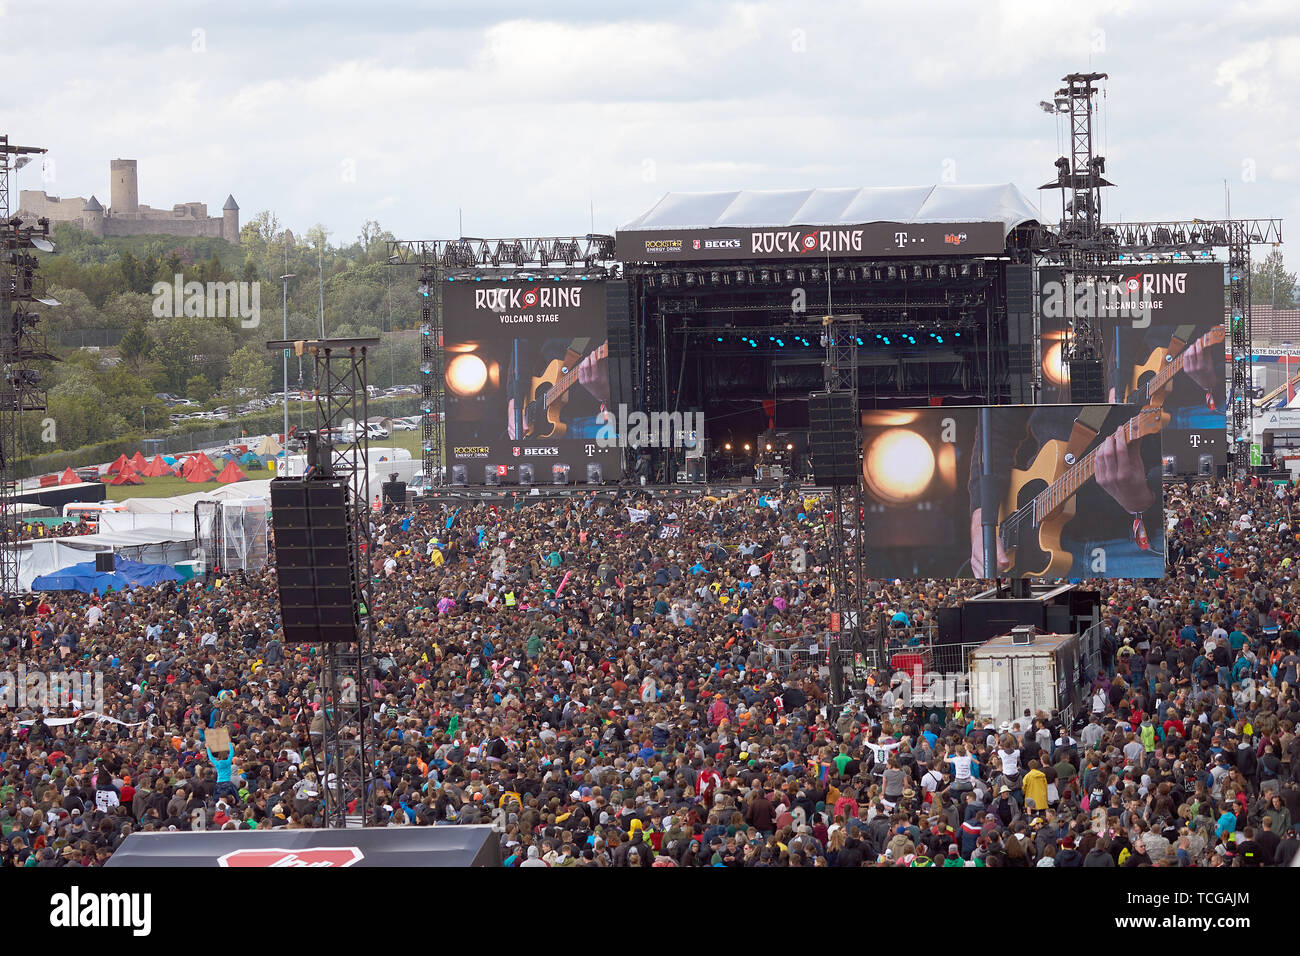 Nürburg, Germany, 08th June, 2019. Rock fans crowd during the performance  of the band "Feine Sahne Fischfilet" in front of the main stage of the  open-air festival "Rock am Ring". On three